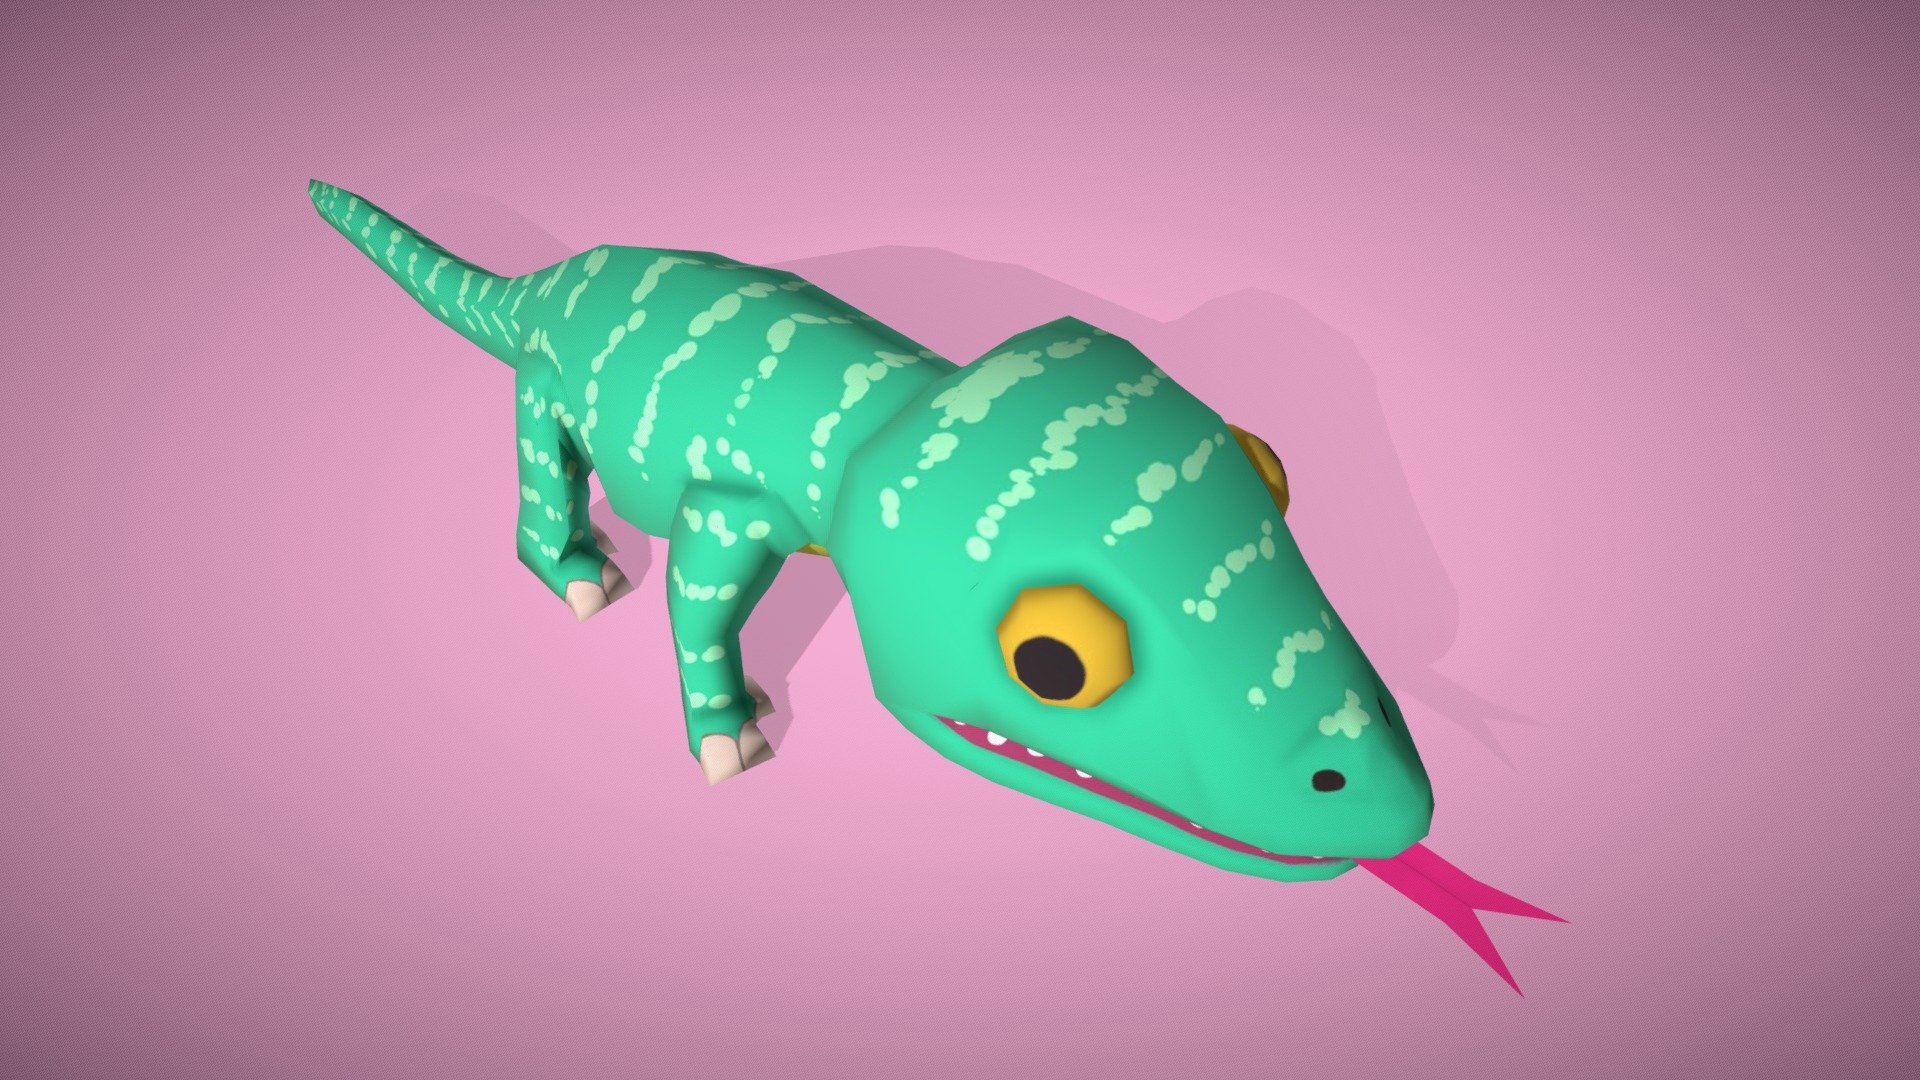 A low-poly cartoon lizard with a simple colorful texture. This asset can be used in games requiring simple cartoony creatures.

It is ready for skinning or use as a static prop 3d model